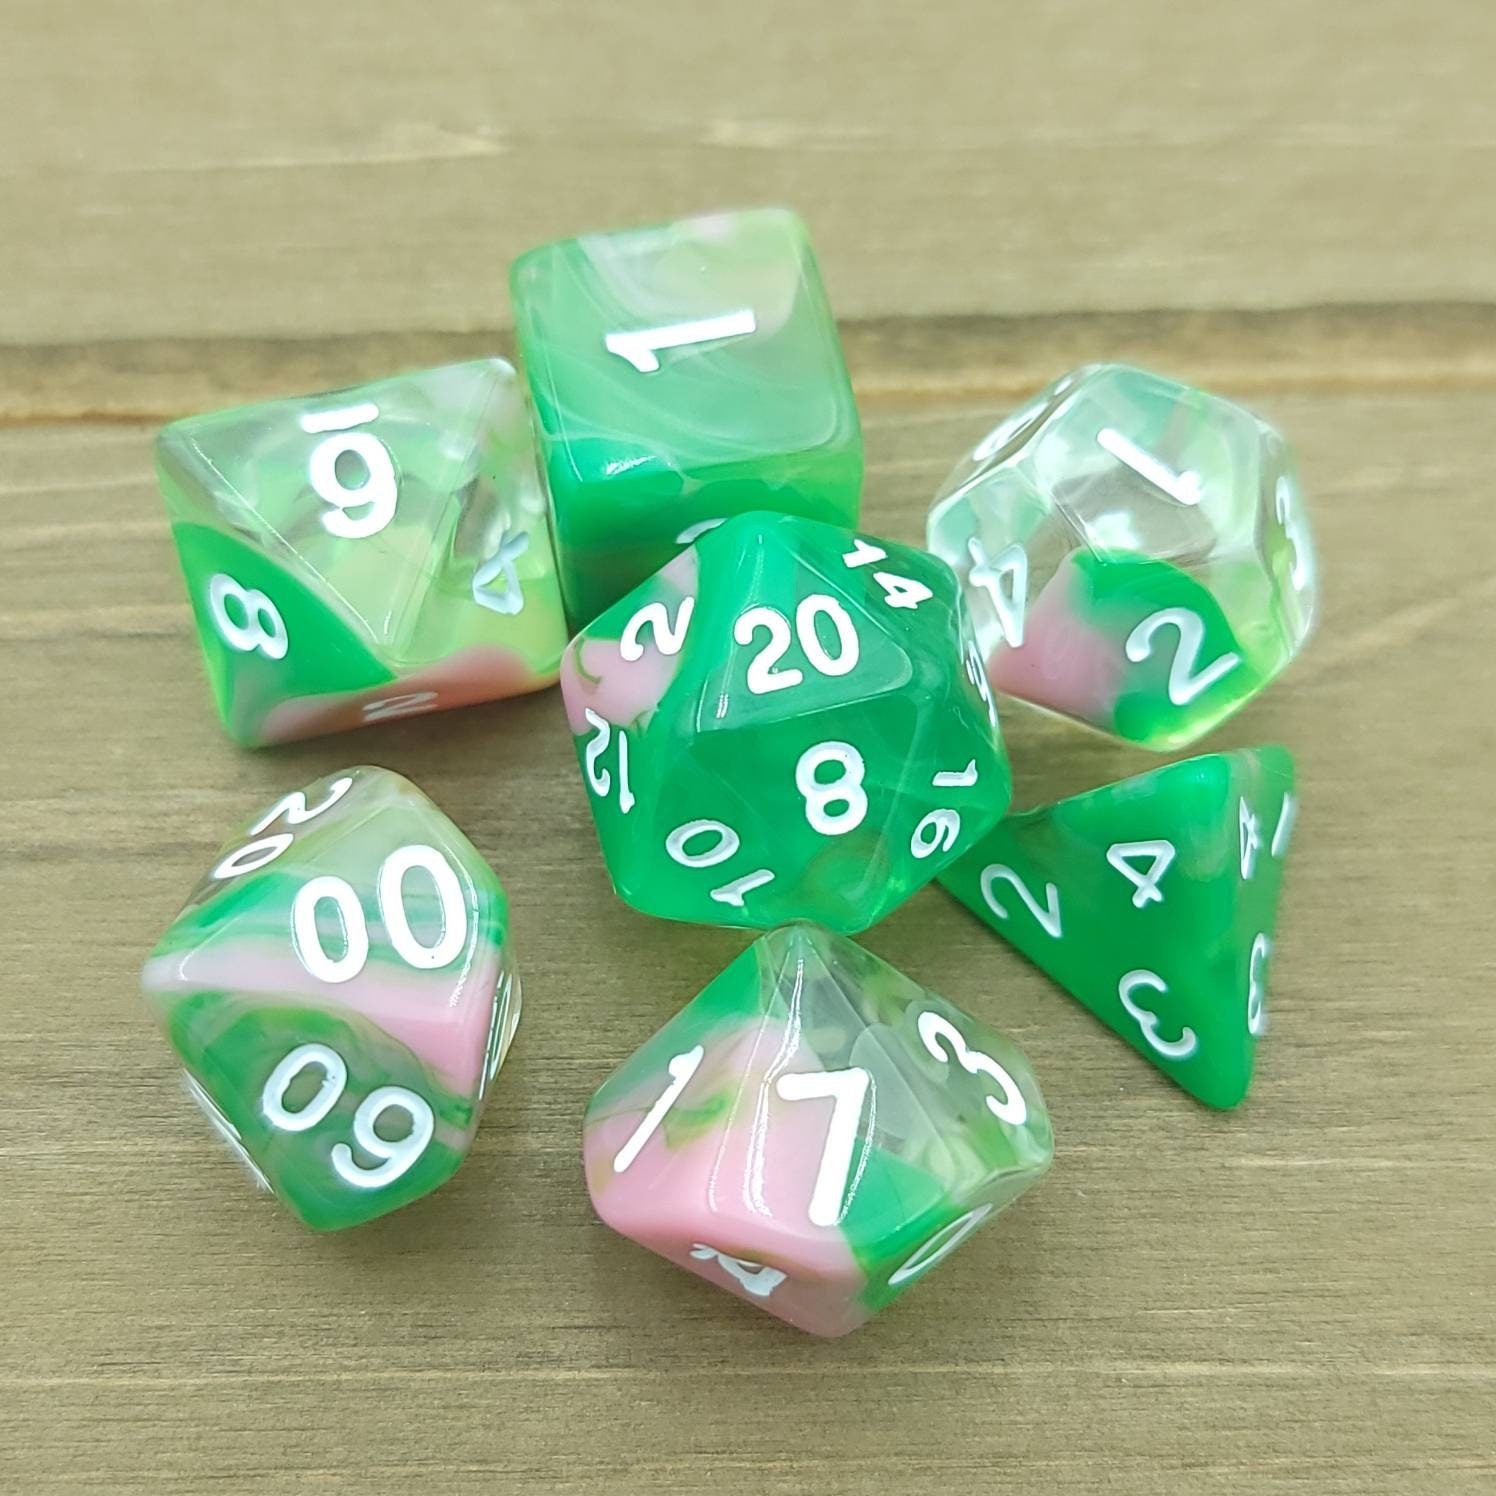 Watermelon Crush | RPG Dice Set| RPG Dice | Polyhedral Dice Set | Dungeons and Dragons | DnD Dice Set | Gaming Dice Set